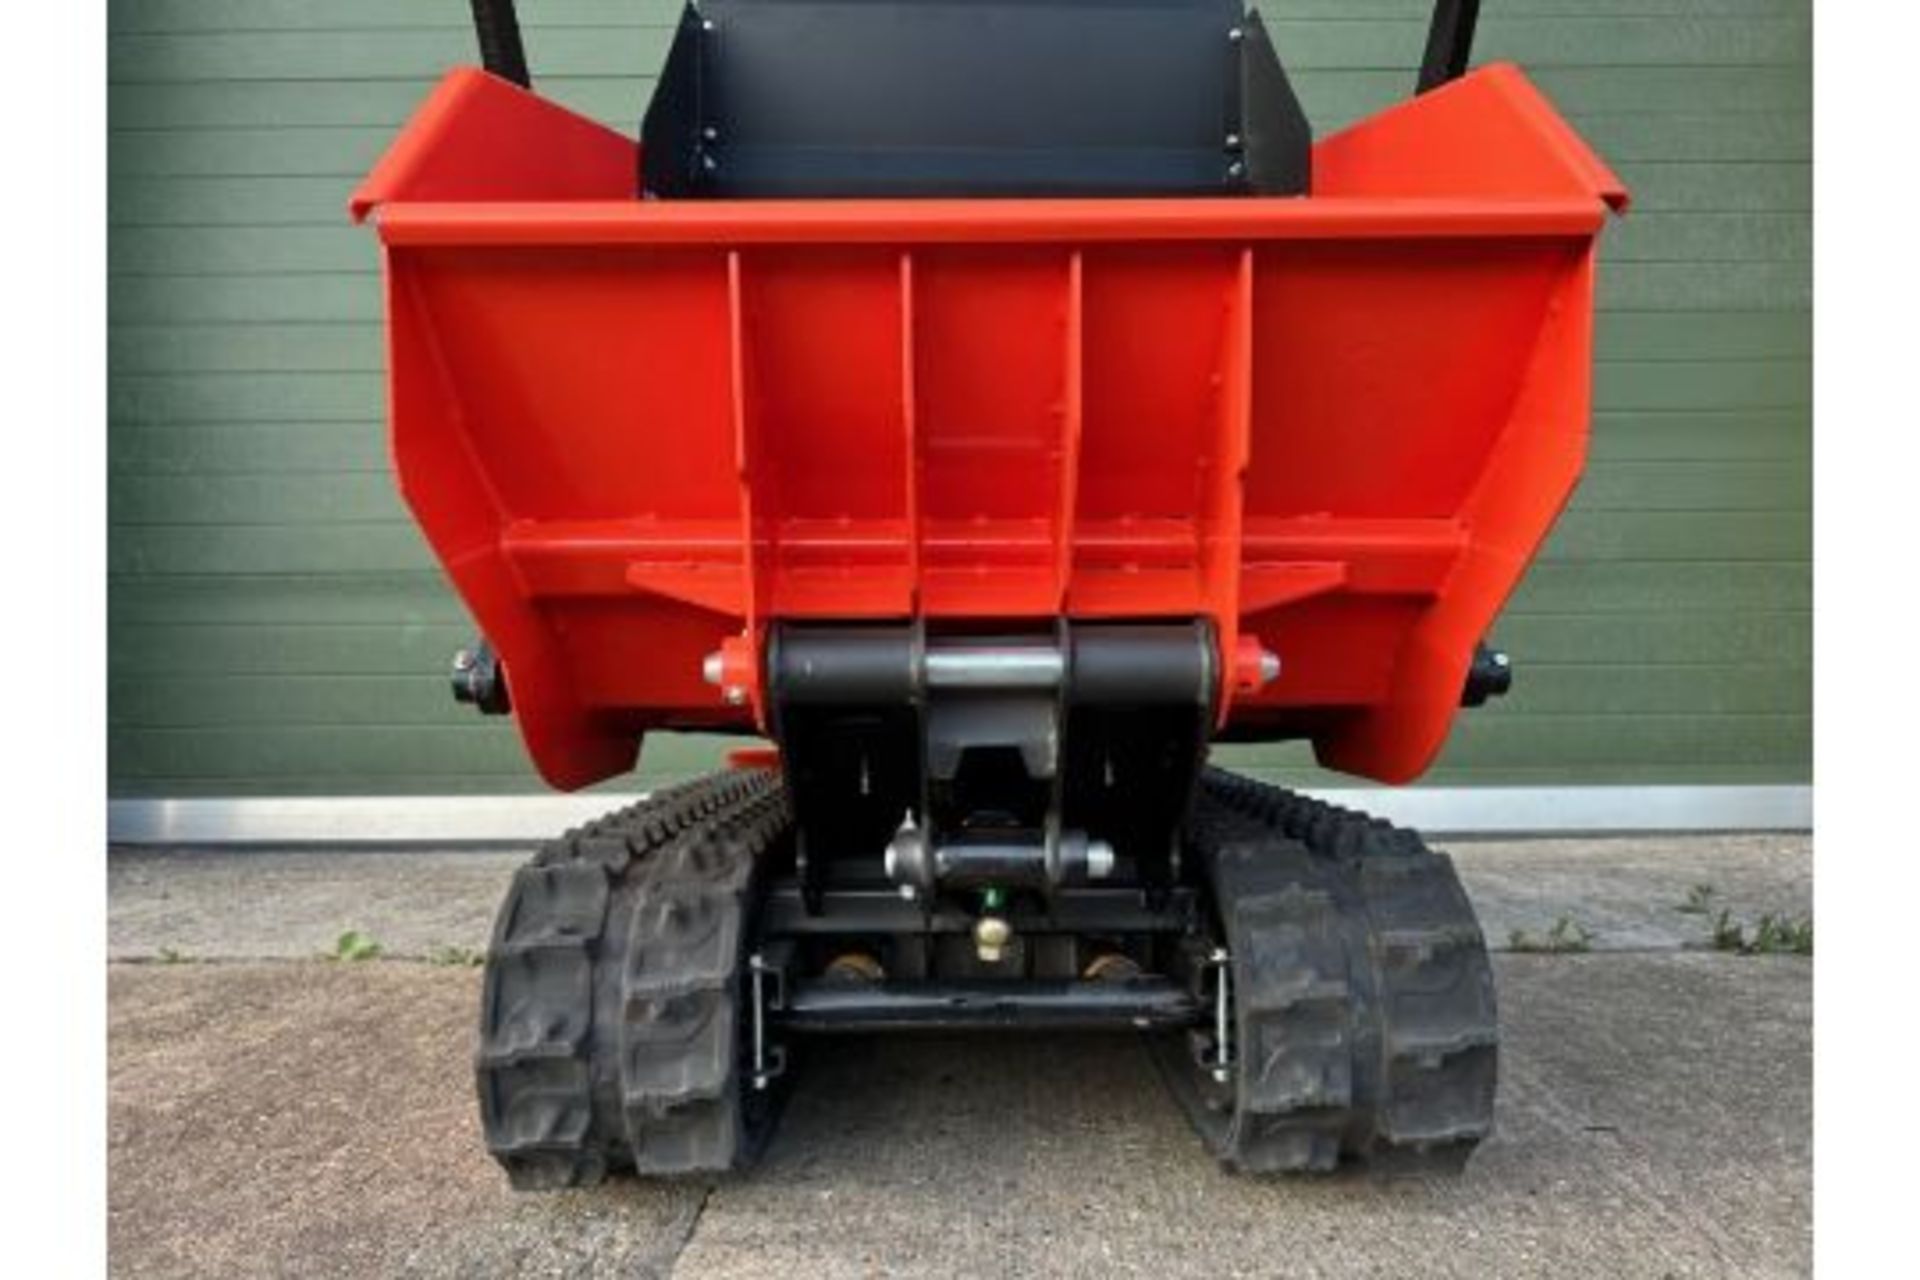 New and unused Armstrong DR-MD-150PRO Self-Loading Tracked Dumper - Image 19 of 21